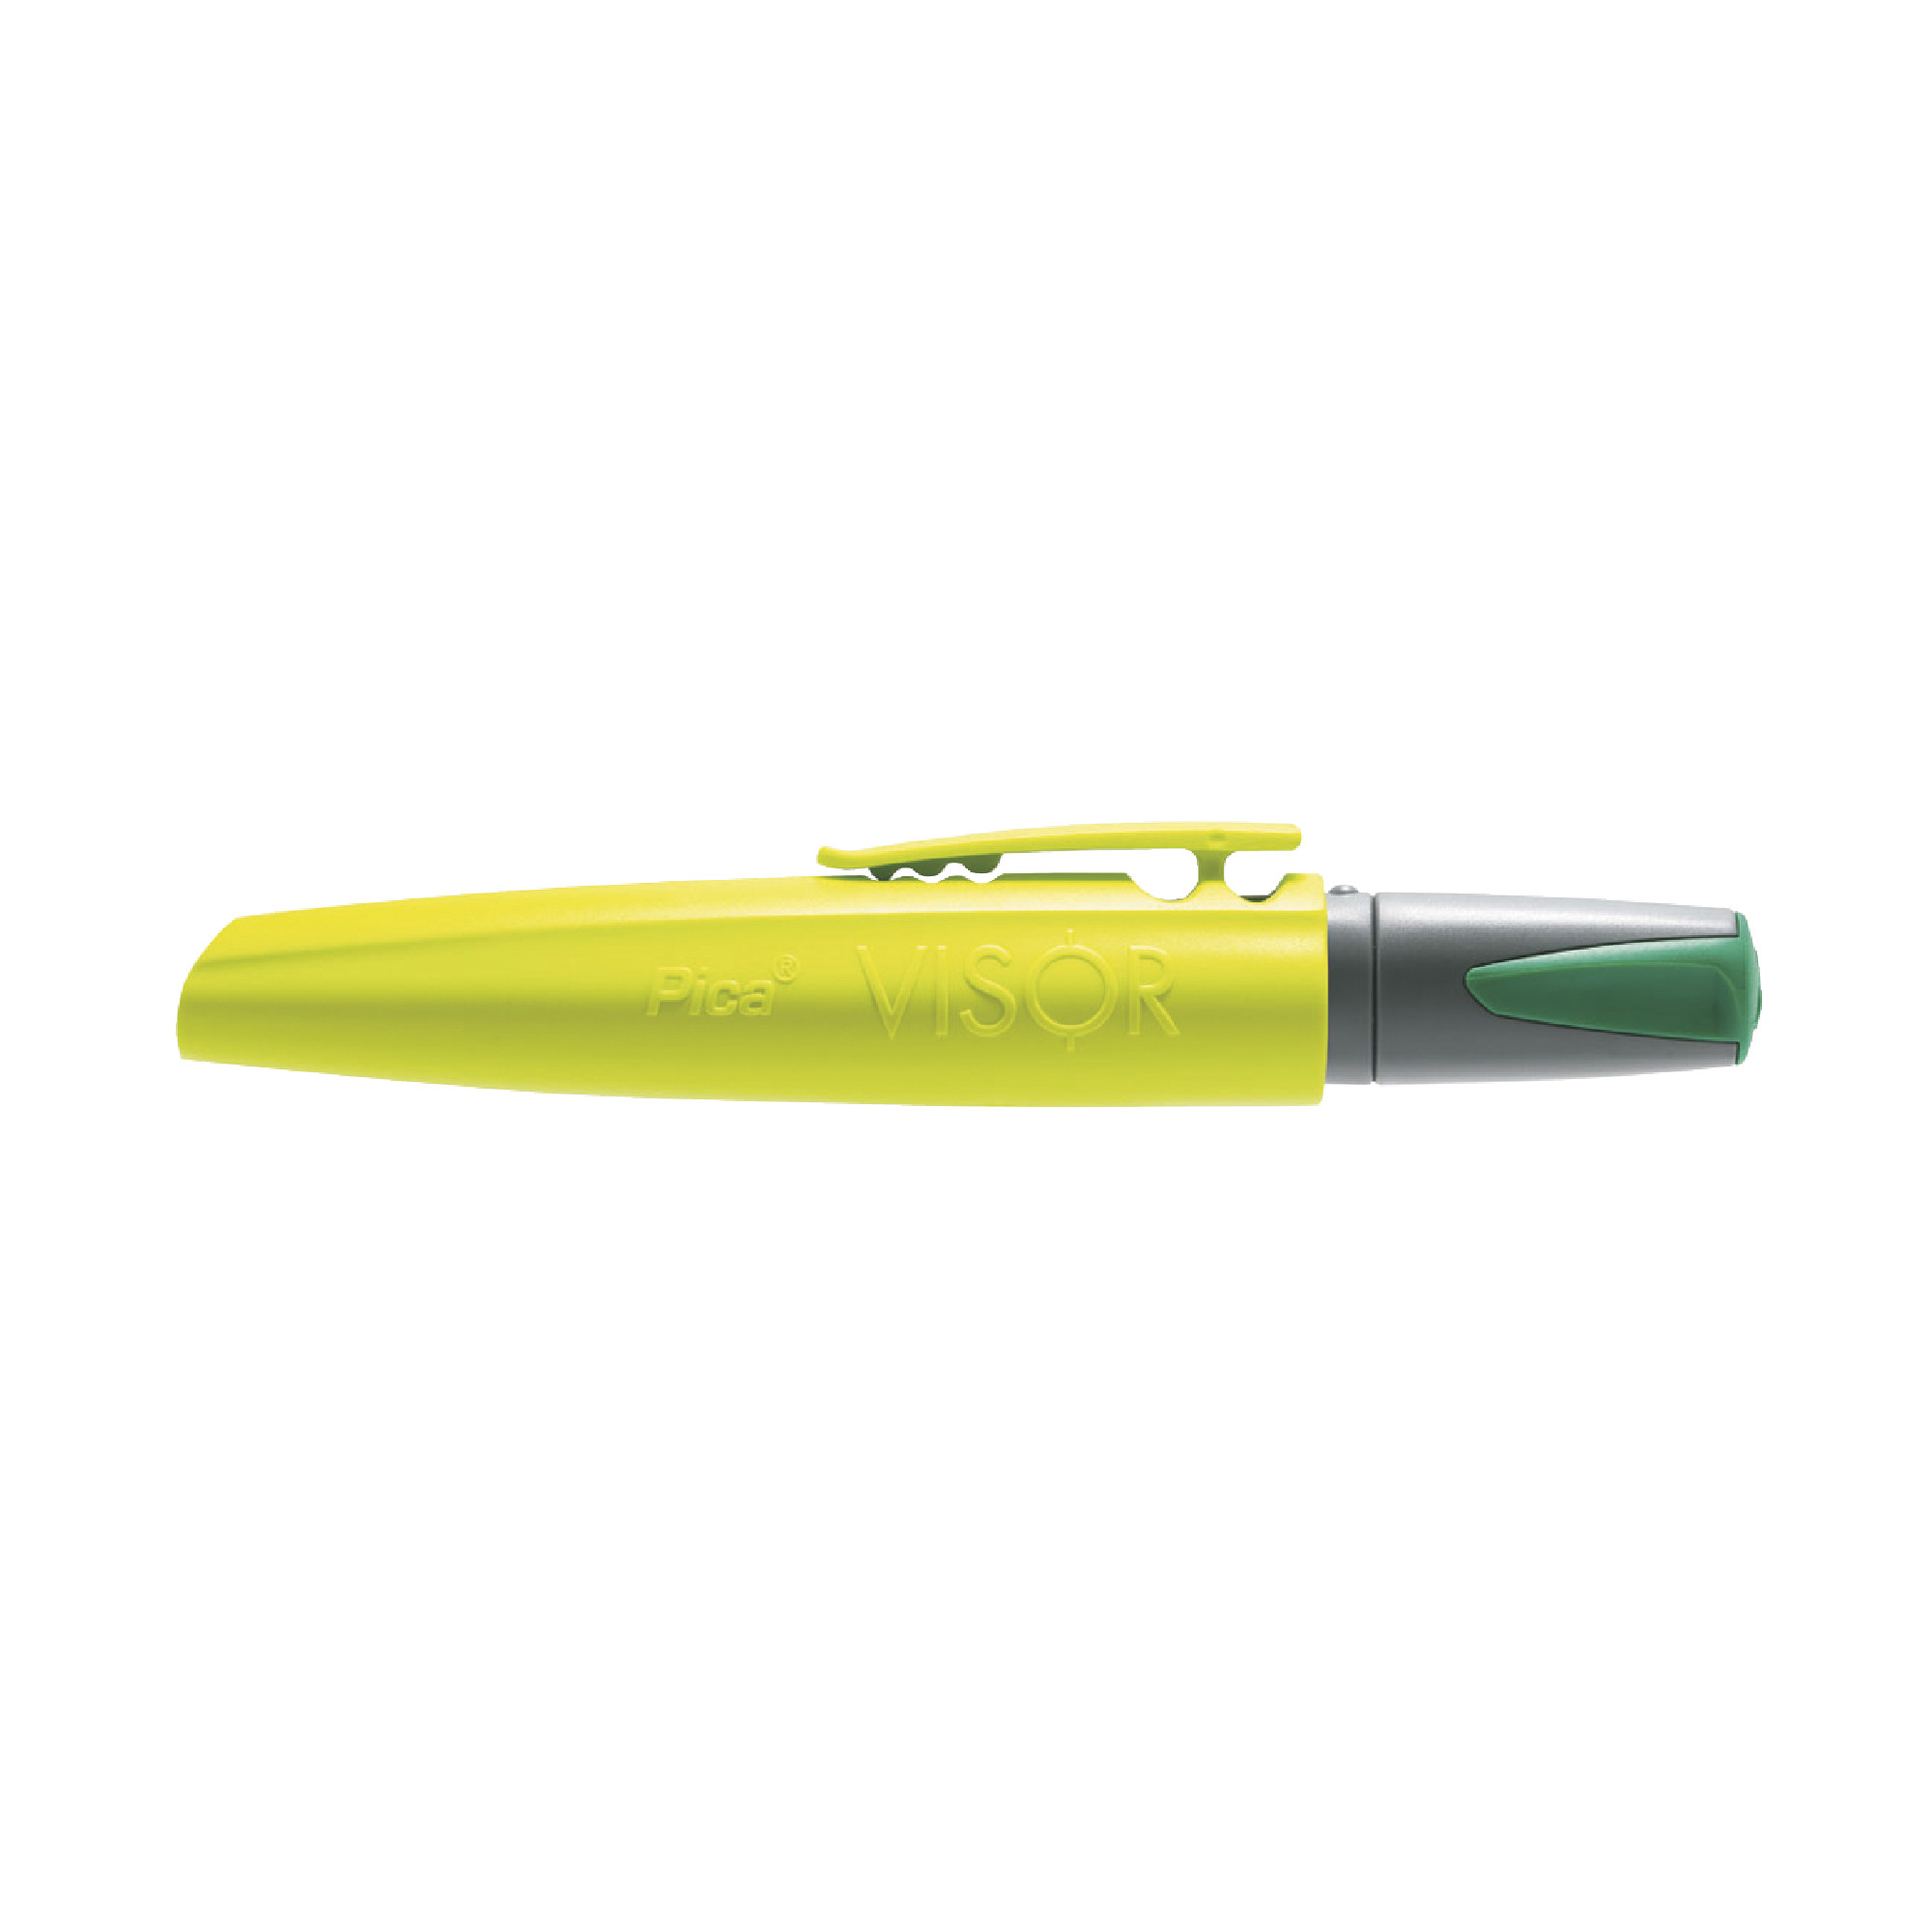 VISOR Longlife Board Marker, The Marker That Never Dries Out, Green